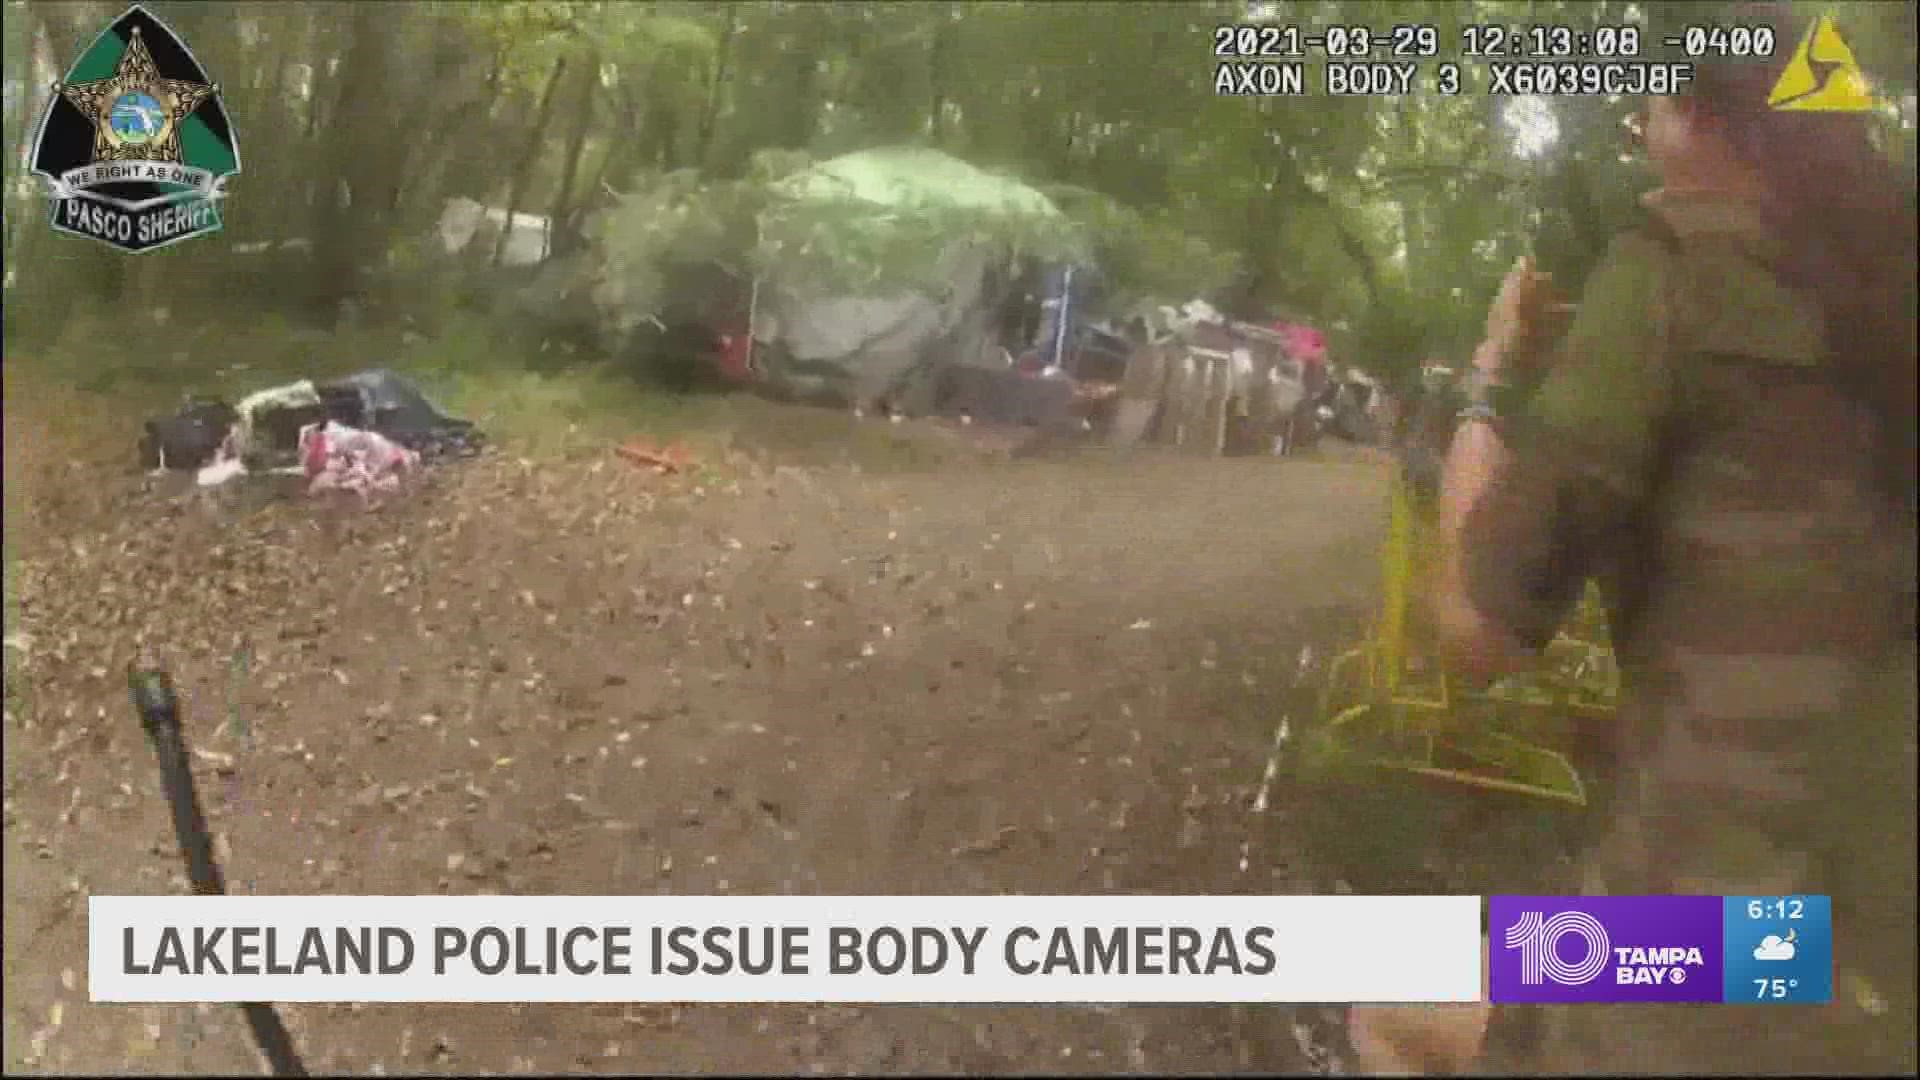 The Polk County Sheriff's Office doesn't intend to adopt body cameras anytime soon, citing privacy concerns for citizens.